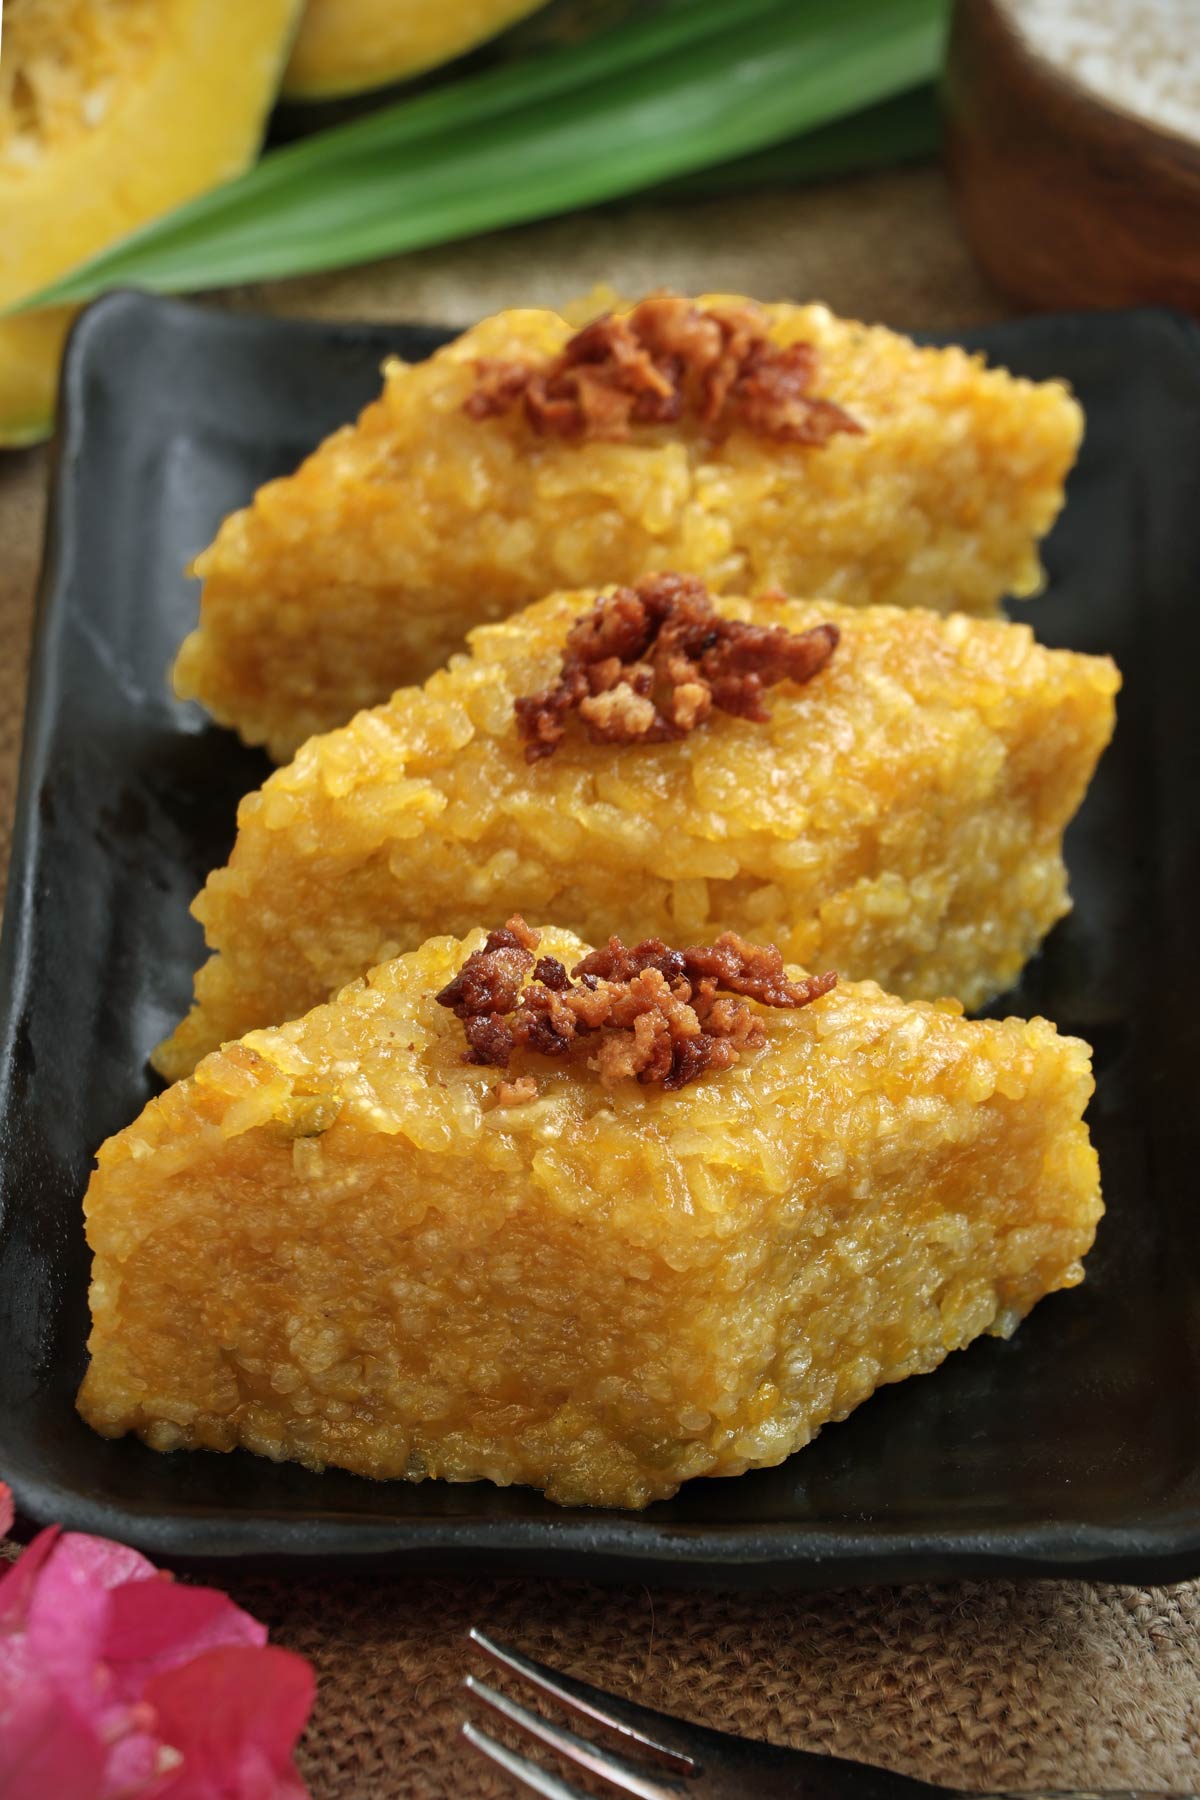 Biko Kalabasa or Sticky Rice Cake with squash cut into squares for serving.